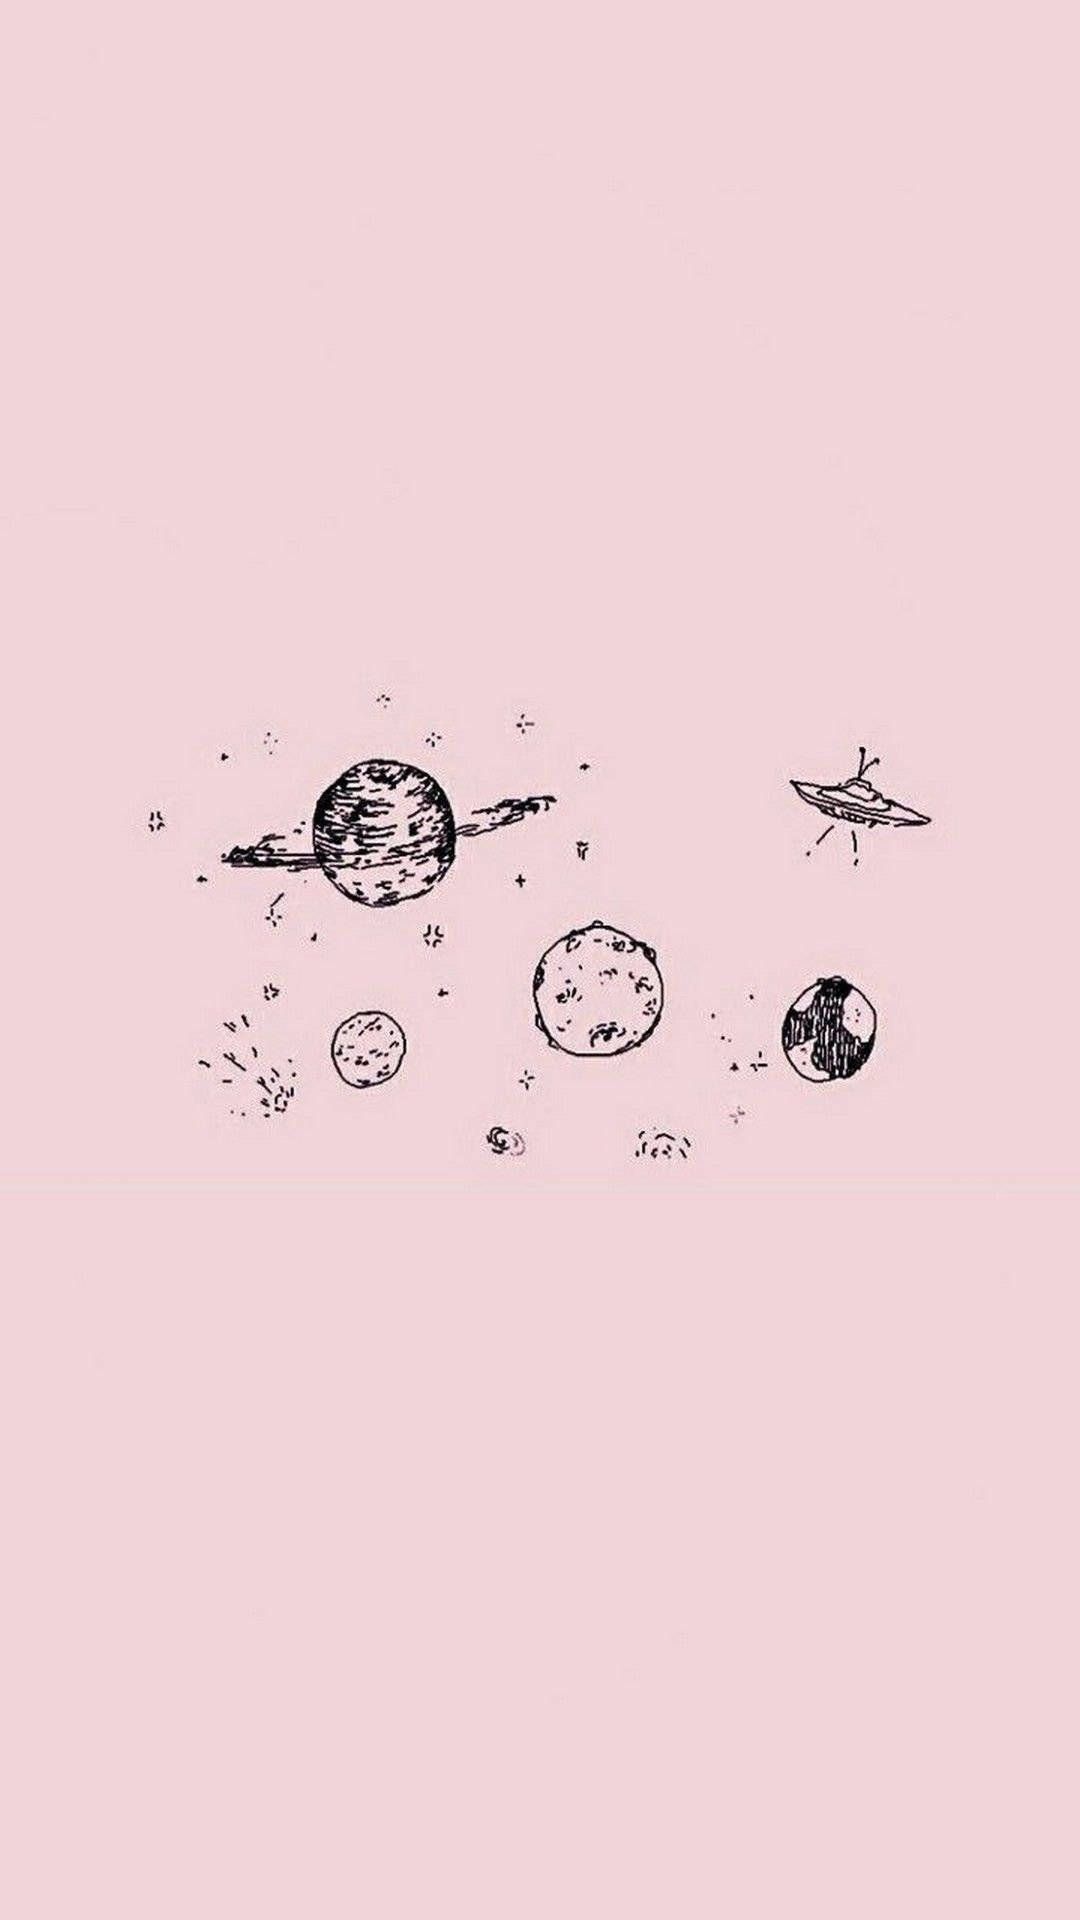 A black and white drawing of planets on pink background - Doodles